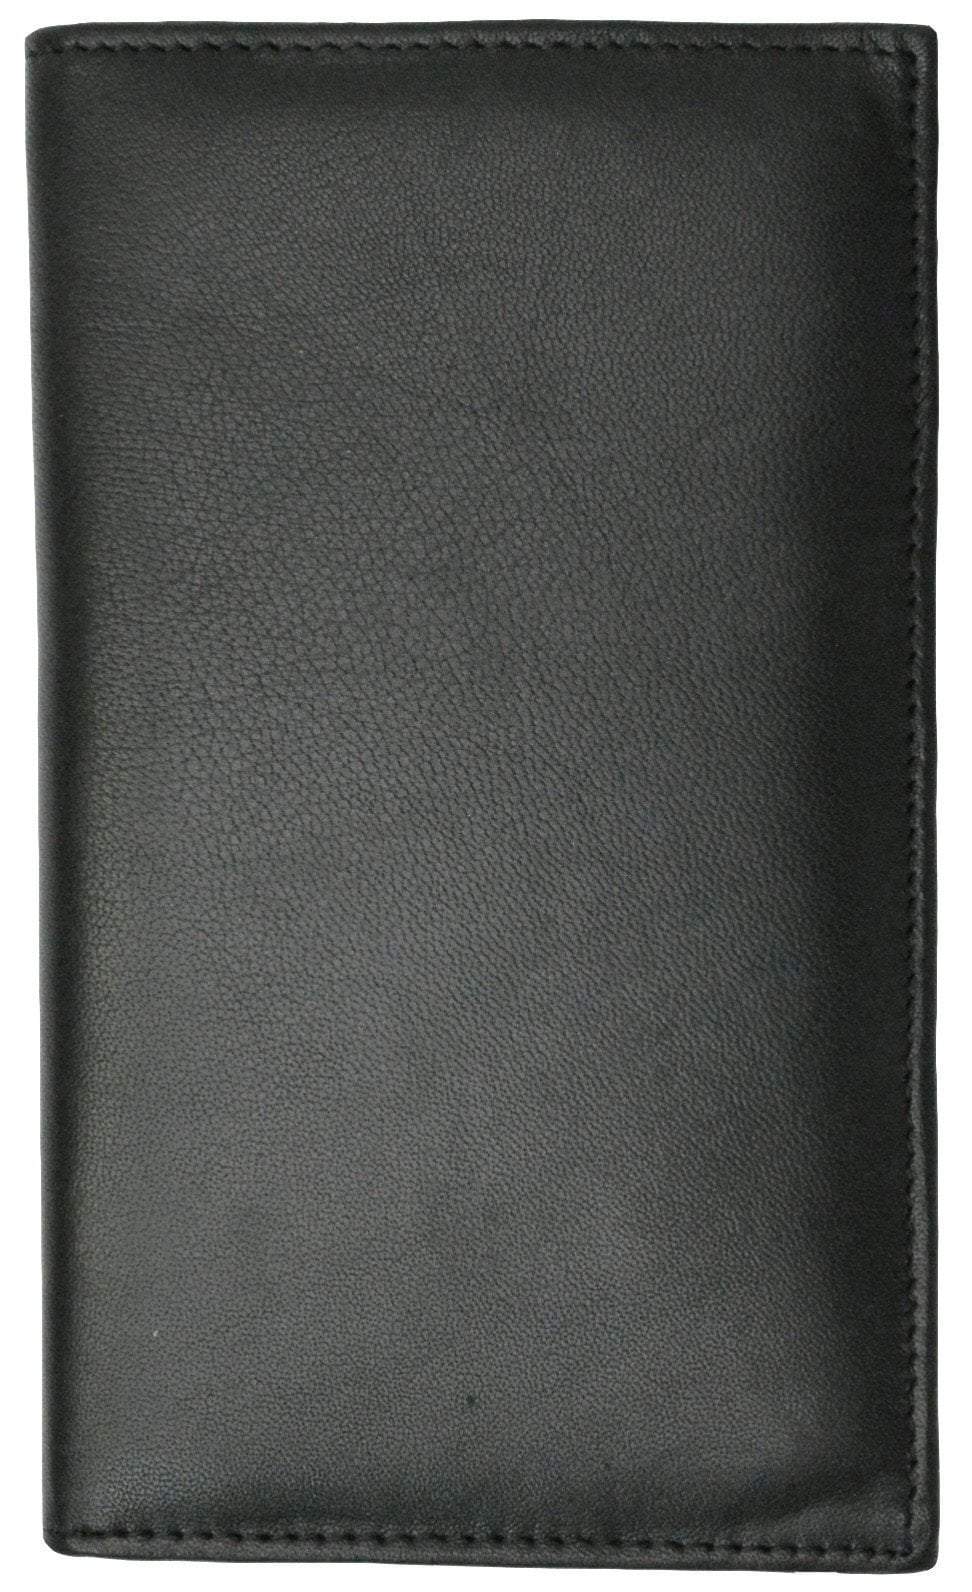 Premium Leather Bifold Credit Card ID Holder P 1529 (C) - wallets for men's at mens wallet